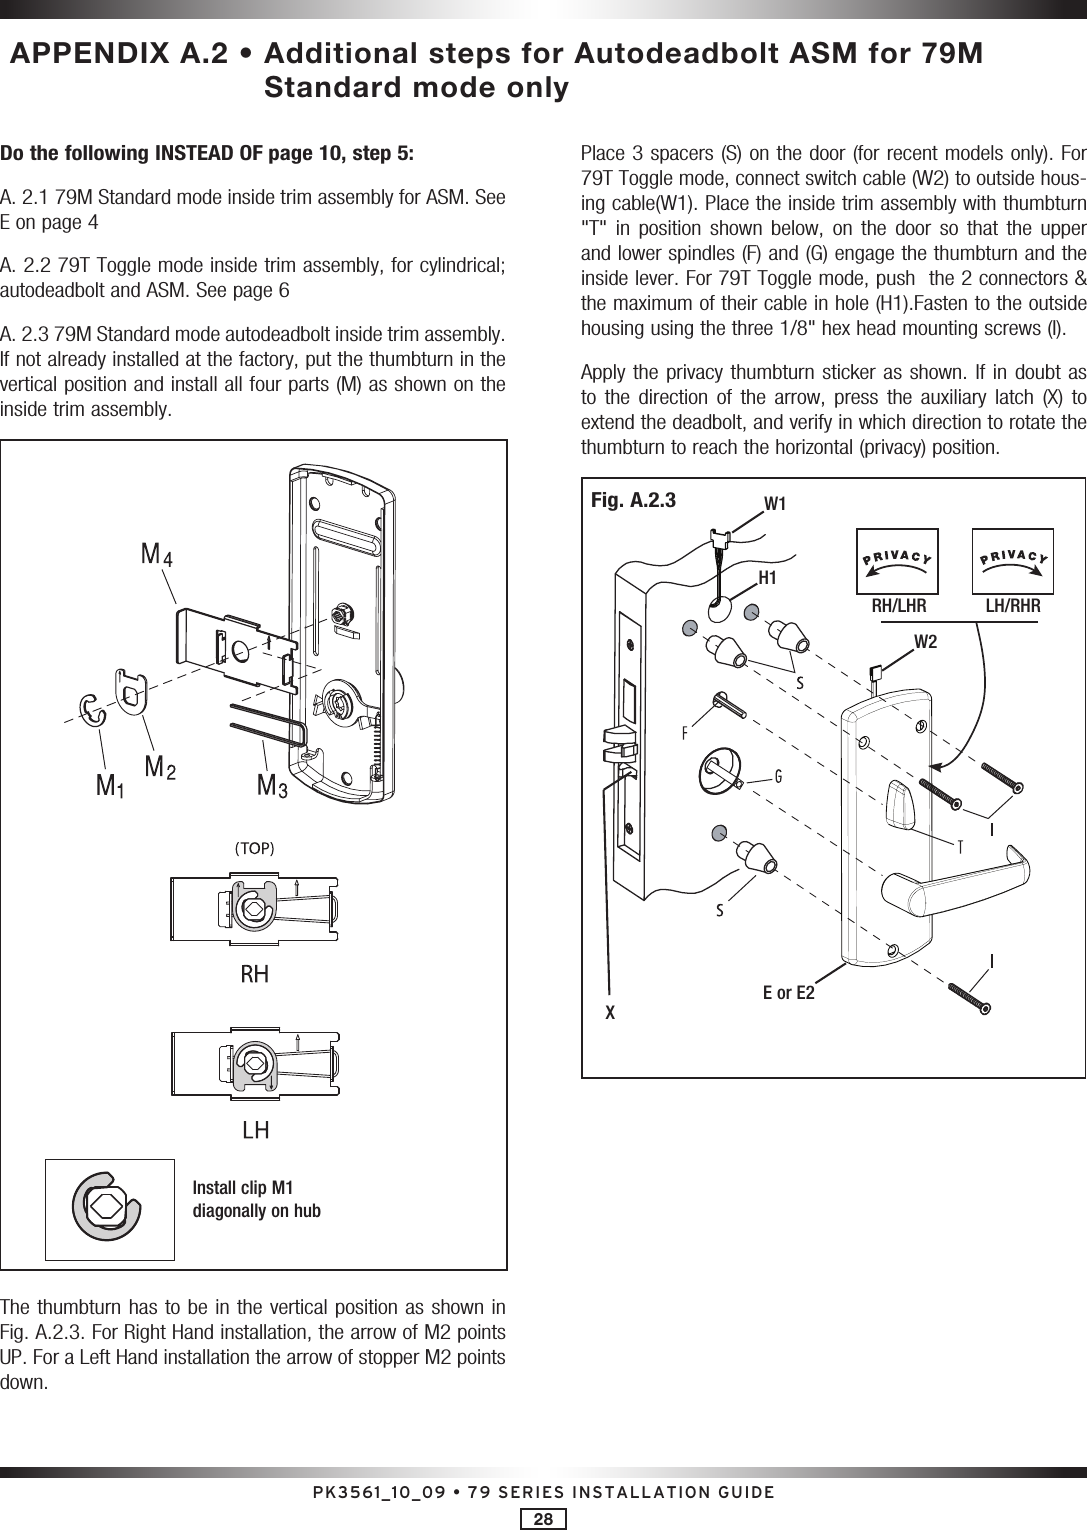 PK3561_10_09 • 79 SERIES INSTALLATION GUIDE28 APPENDIX A.2 •  Additional steps for Autodeadbolt ASM for 79M Standard mode onlyDo the following INSTEAD OF page 10, step 5:A. 2.1 79M Standard mode inside trim assembly for ASM. See E on page 4A. 2.2 79T Toggle mode inside trim assembly, for cylindrical; autodeadbolt and ASM. See page 6A. 2.3 79M Standard mode autodeadbolt inside trim assembly. If not already installed at the factory, put the thumbturn in the vertical position and install all four parts (M) as shown on the inside trim assembly.Install clip M1 diagonally on hubThe thumbturn has to be in the vertical position as shown in Fig. A.2.3. For Right Hand installation, the arrow of M2 points UP. For a Left Hand installation the arrow of stopper M2 points down.Place 3 spacers (S) on the door (for recent models only). For 79T Toggle mode, connect switch cable (W2) to outside hous-ing cable(W1). Place the inside trim assembly with thumbturn &quot;T&quot;  in  position  shown  below,  on  the  door so  that  the  upper and lower spindles (F) and (G) engage the thumbturn and the inside lever. For 79T Toggle mode, push  the 2 connectors &amp; the maximum of their cable in hole (H1).Fasten to the outside housing using the three 1/8&quot; hex head mounting screws (I).Apply the  privacy thumbturn sticker as shown. If in  doubt  as to  the  direction  of  the  arrow,  press  the  auxiliary  latch  (X)  to extend the deadbolt, and verify in which direction to rotate the thumbturn to reach the horizontal (privacy) position.RH/LHR            LH/RHRXW1W2E or E2H1Fig. A.2.3